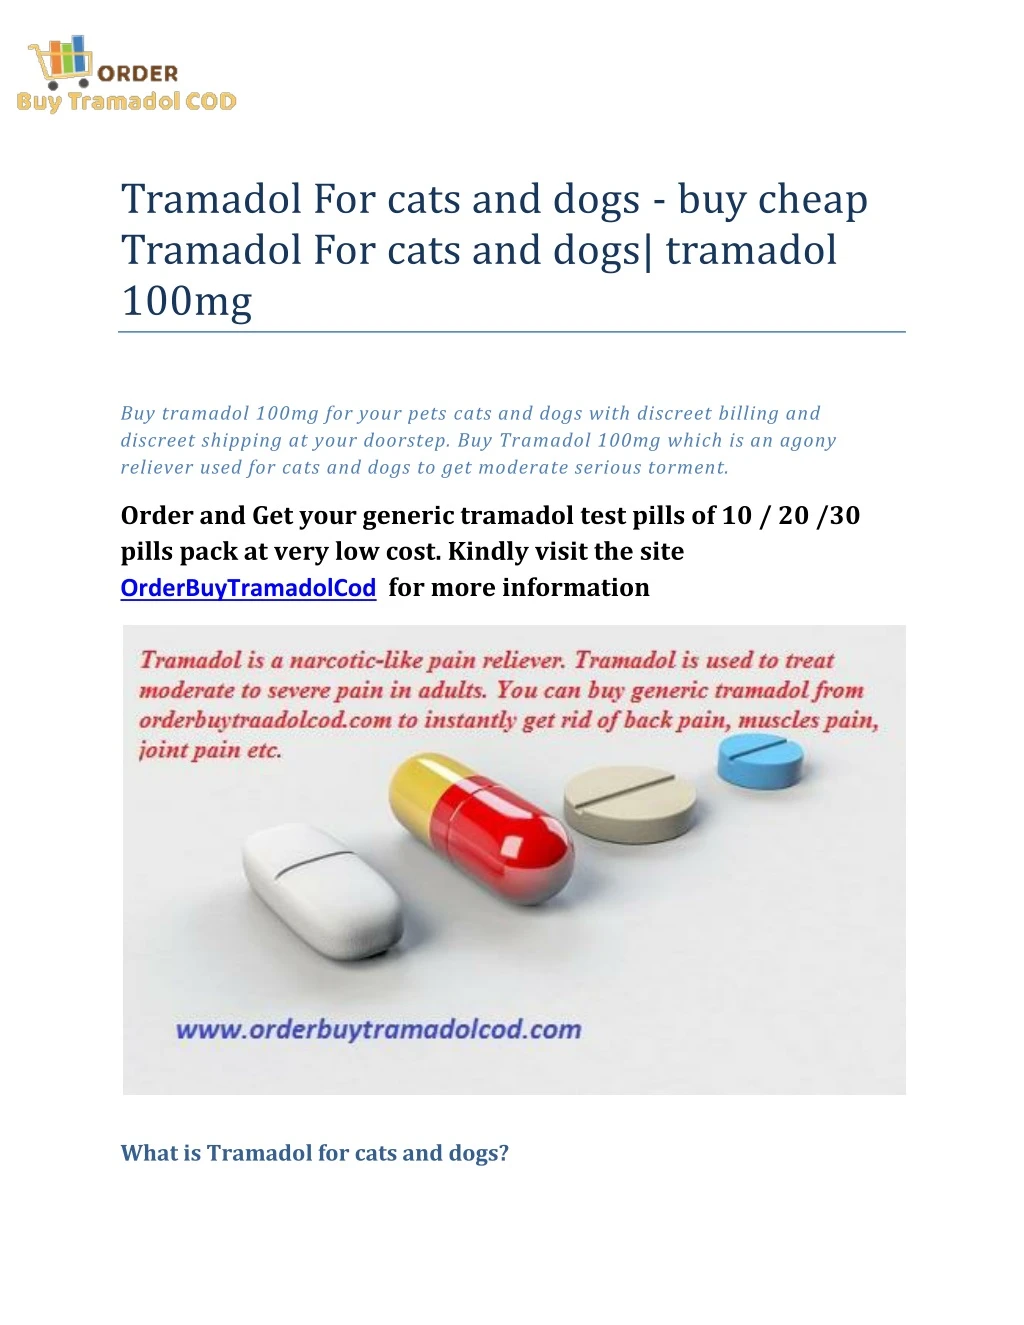 tramadol for cats and dogs buy cheap tramadol